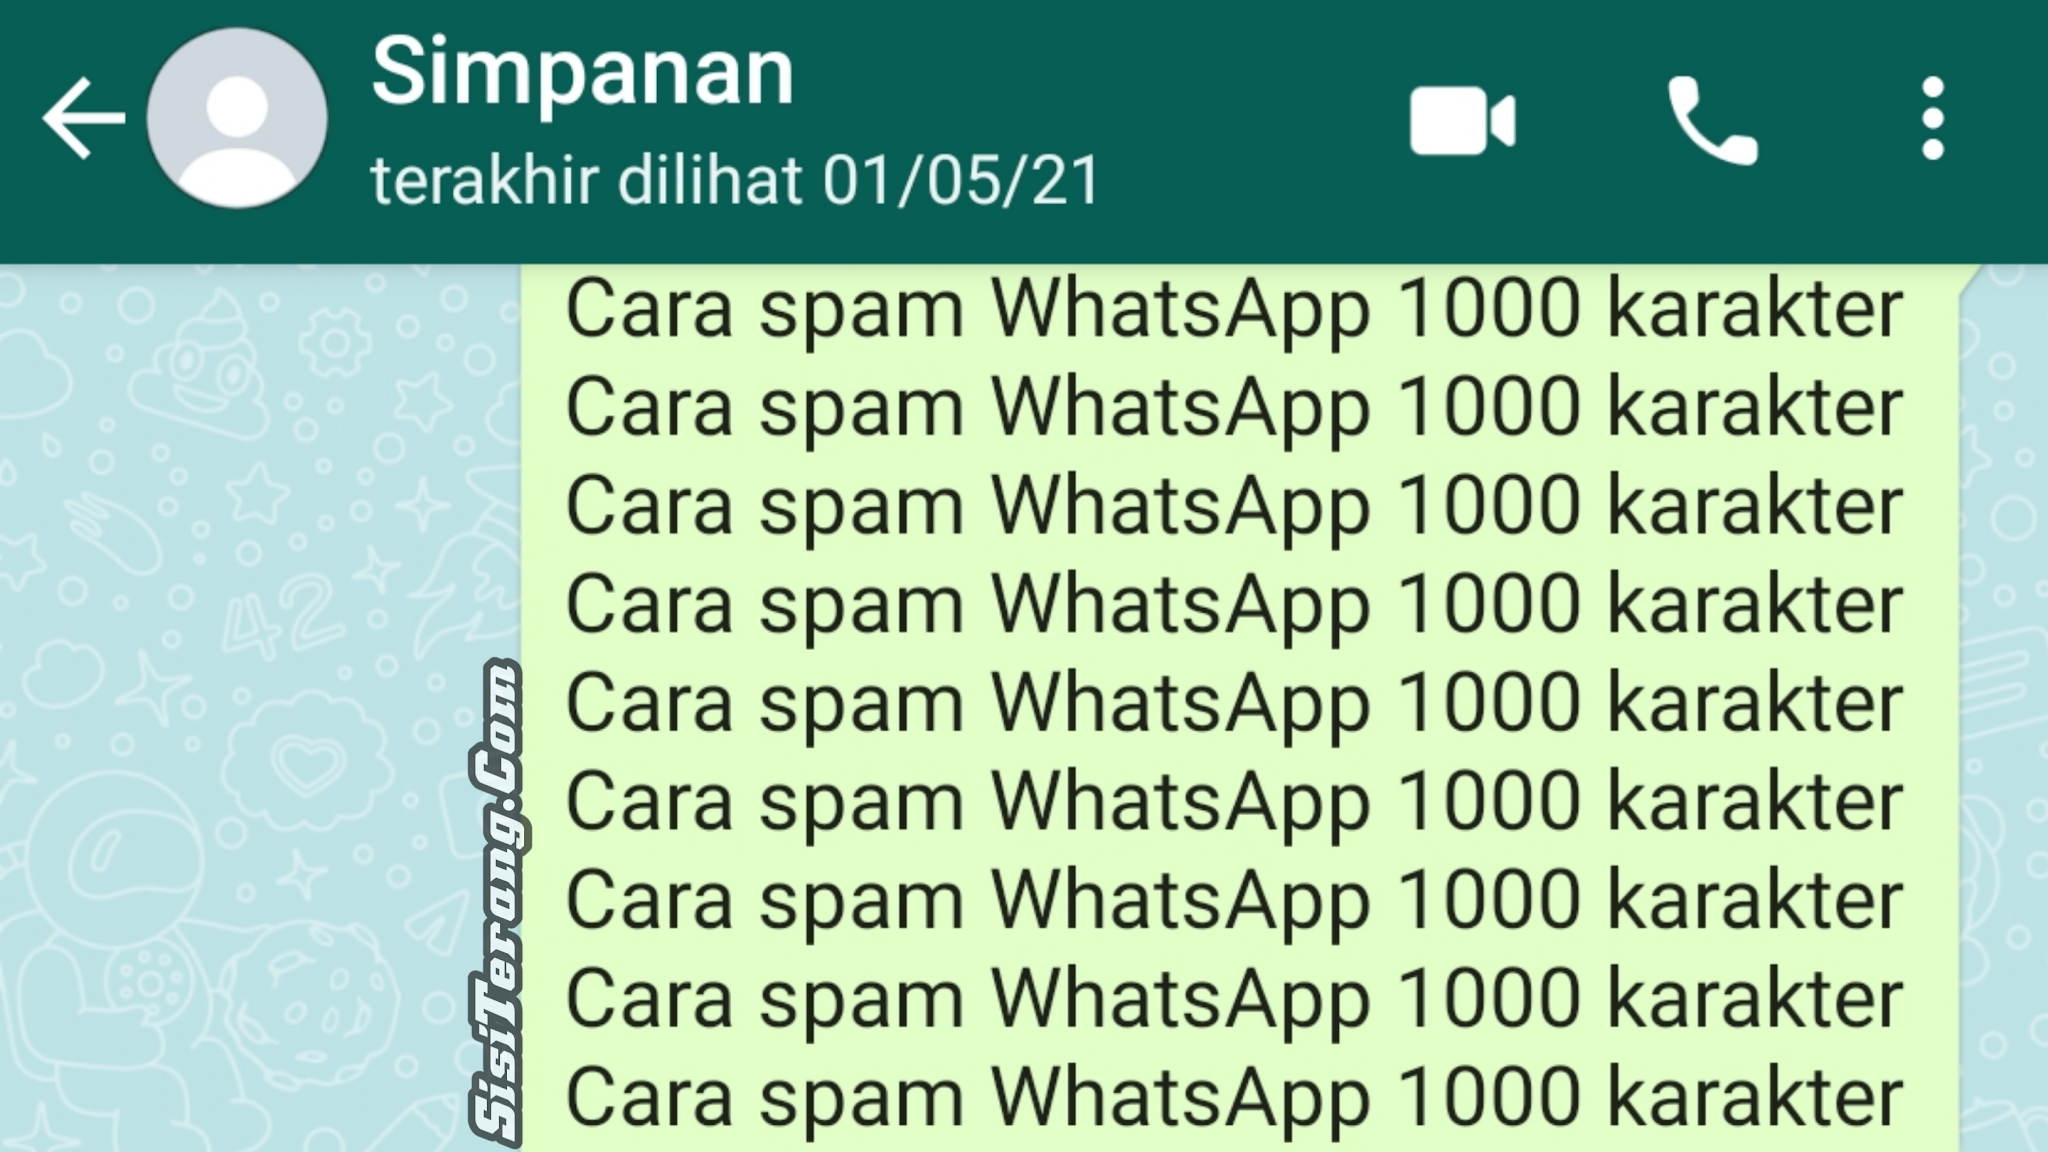 Detail Contoh Spam Chat Nomer 37